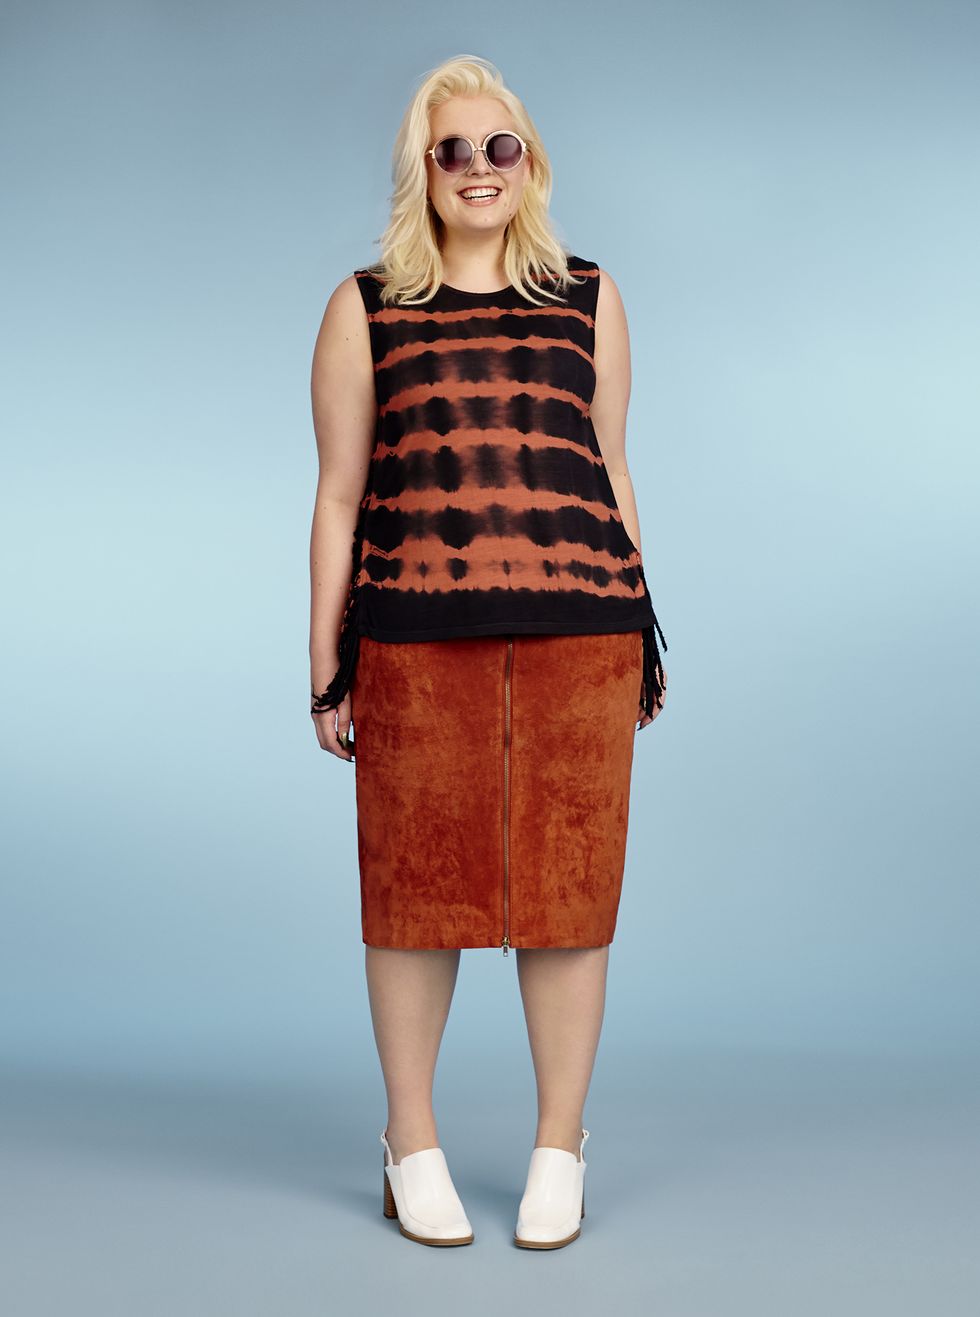 Felicity Hayward modelling ASOS Curve SS15 collection